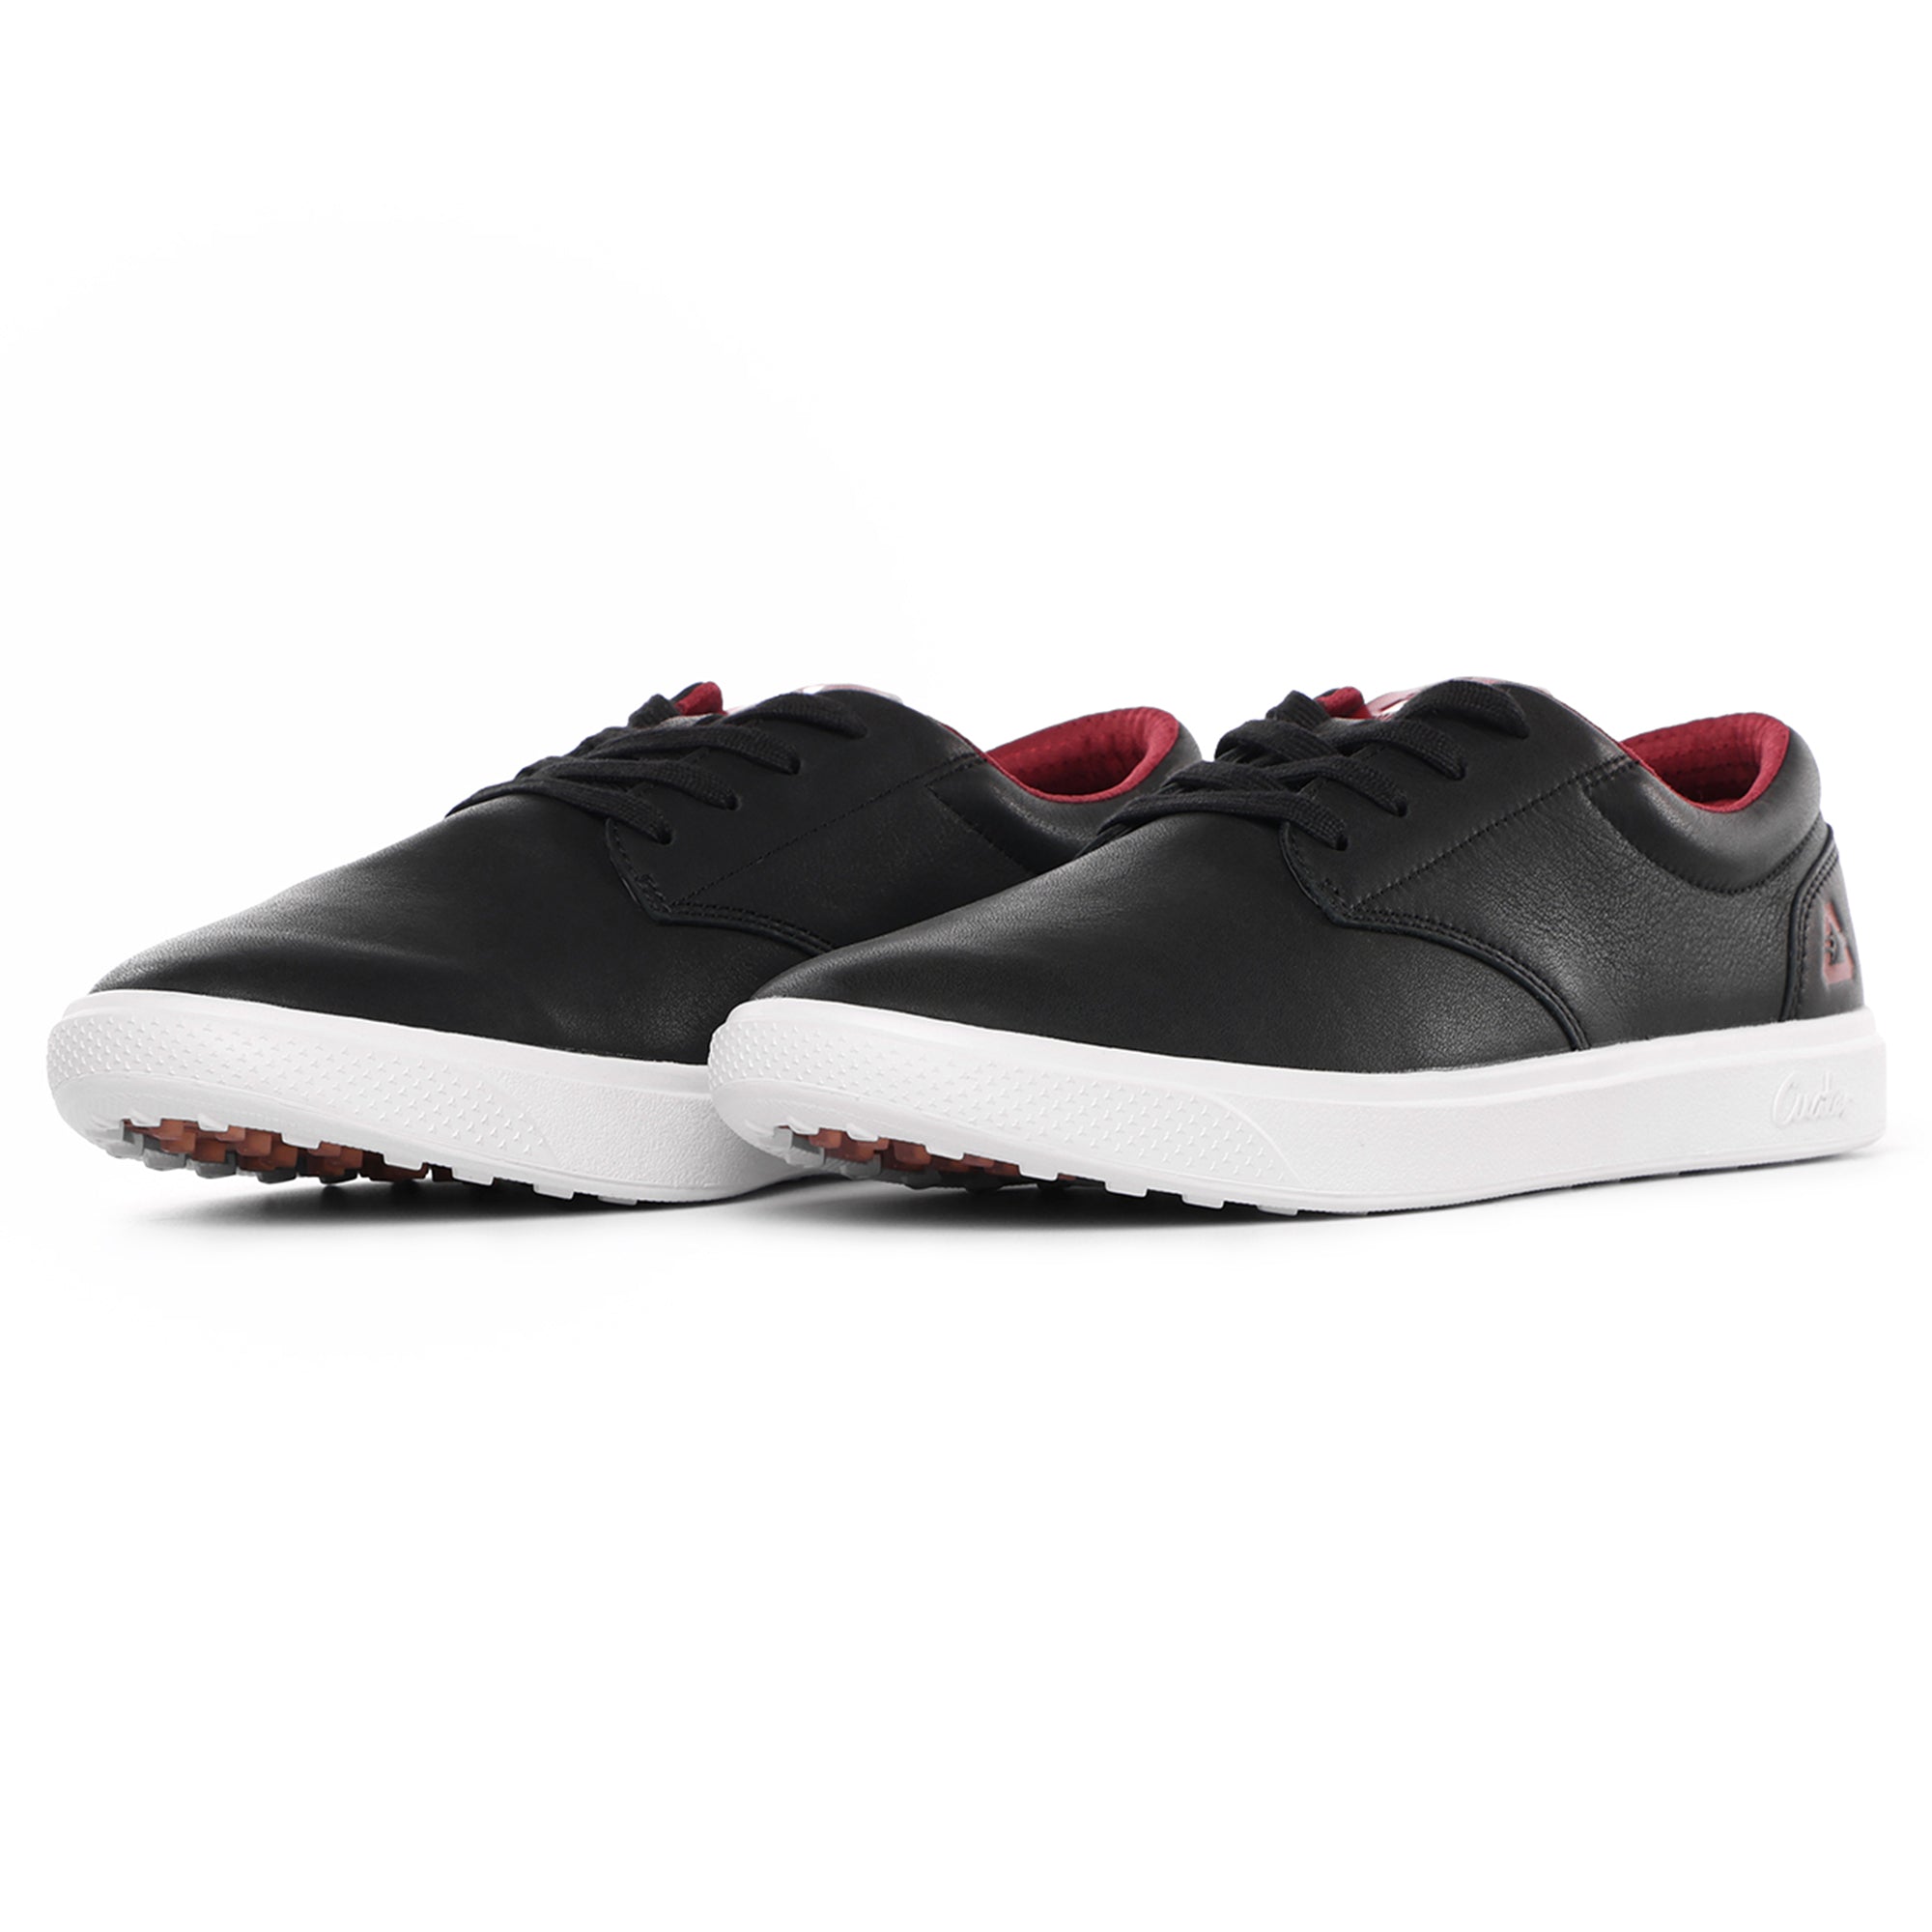 cuater-the-wildcard-leather-golf-shoes-4mu189-black-ruby-wine